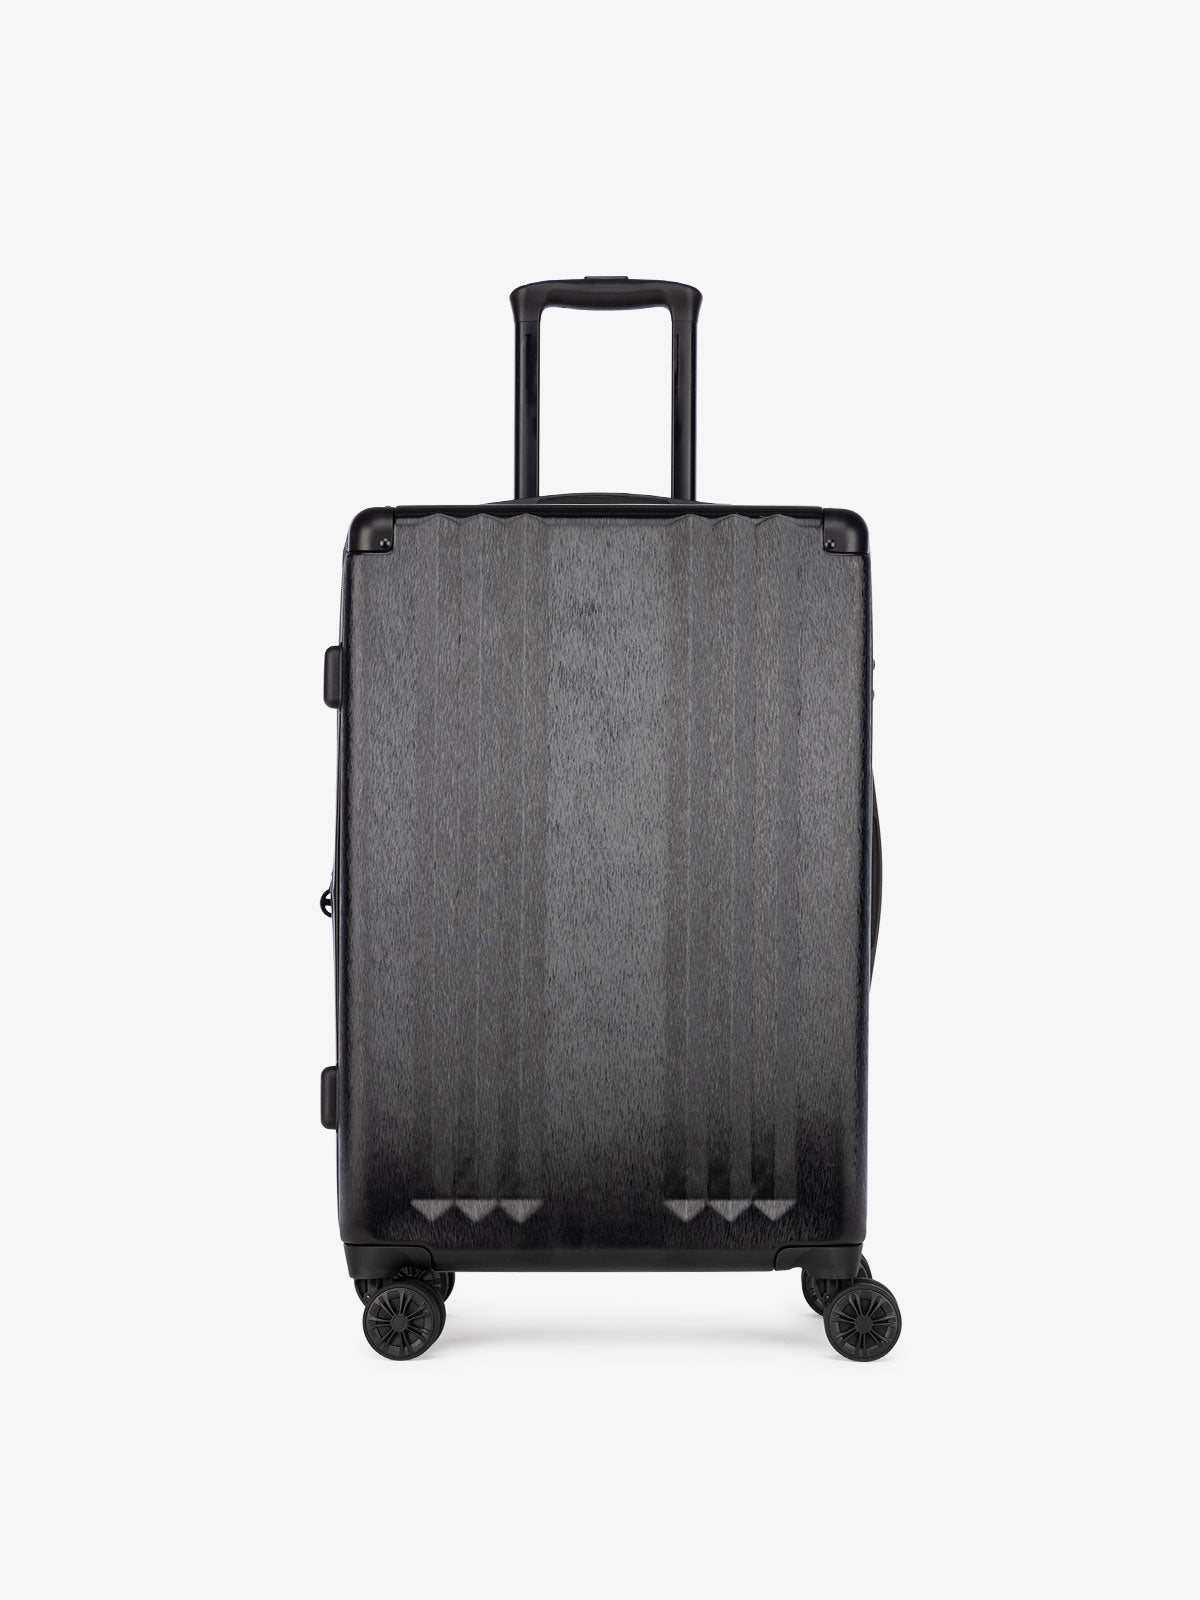 hard shell medium lugggage as a part of a luggage set